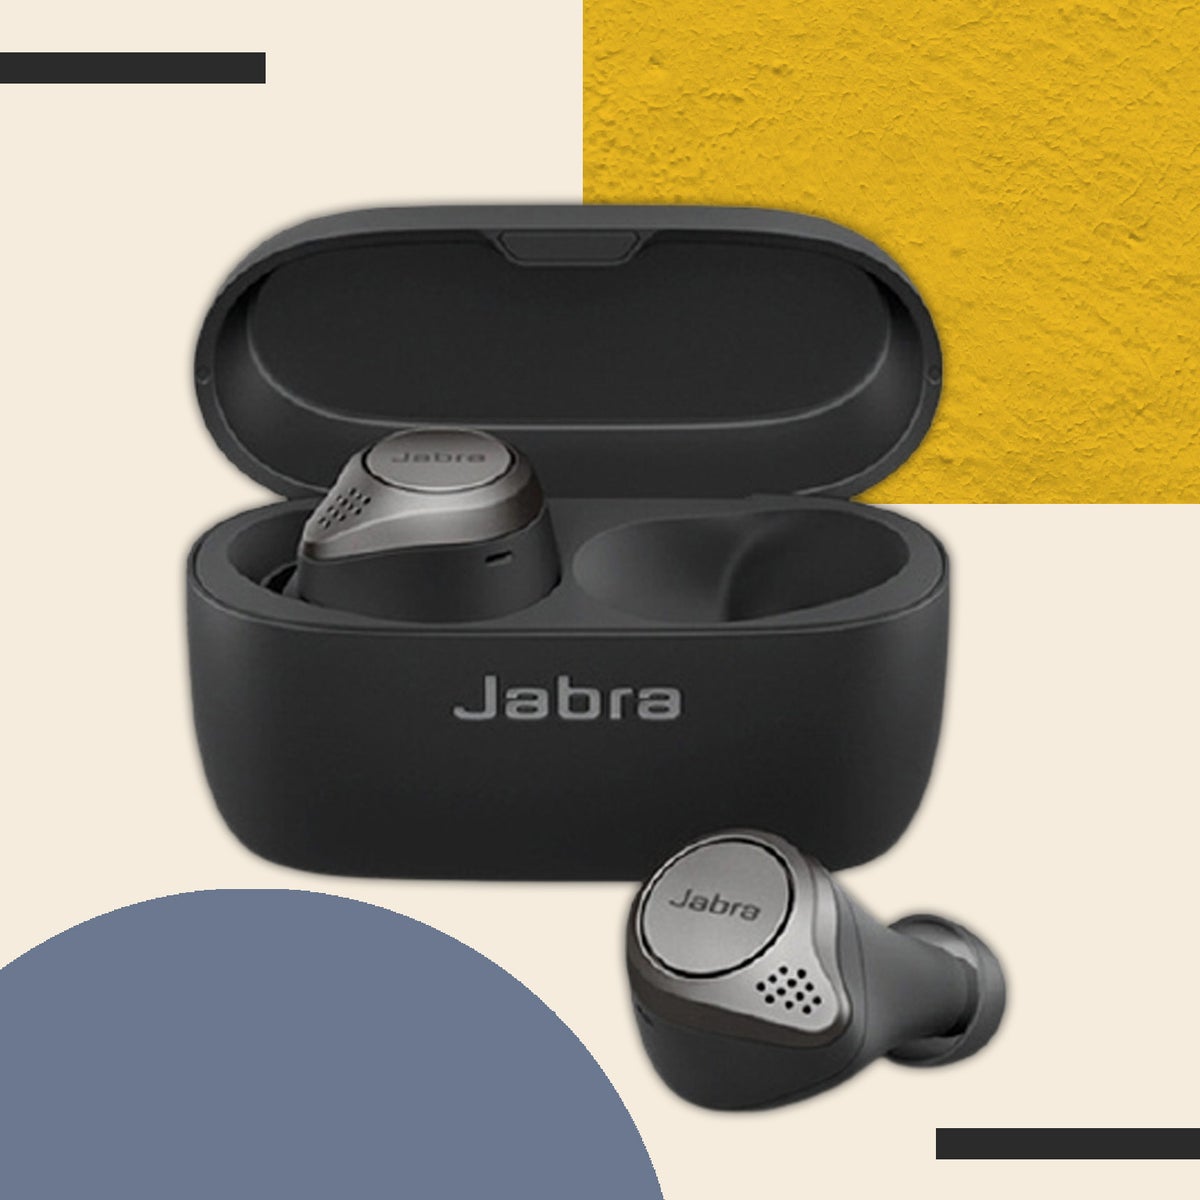 Jabra elite active 75t review: Are the wireless workout earbuds